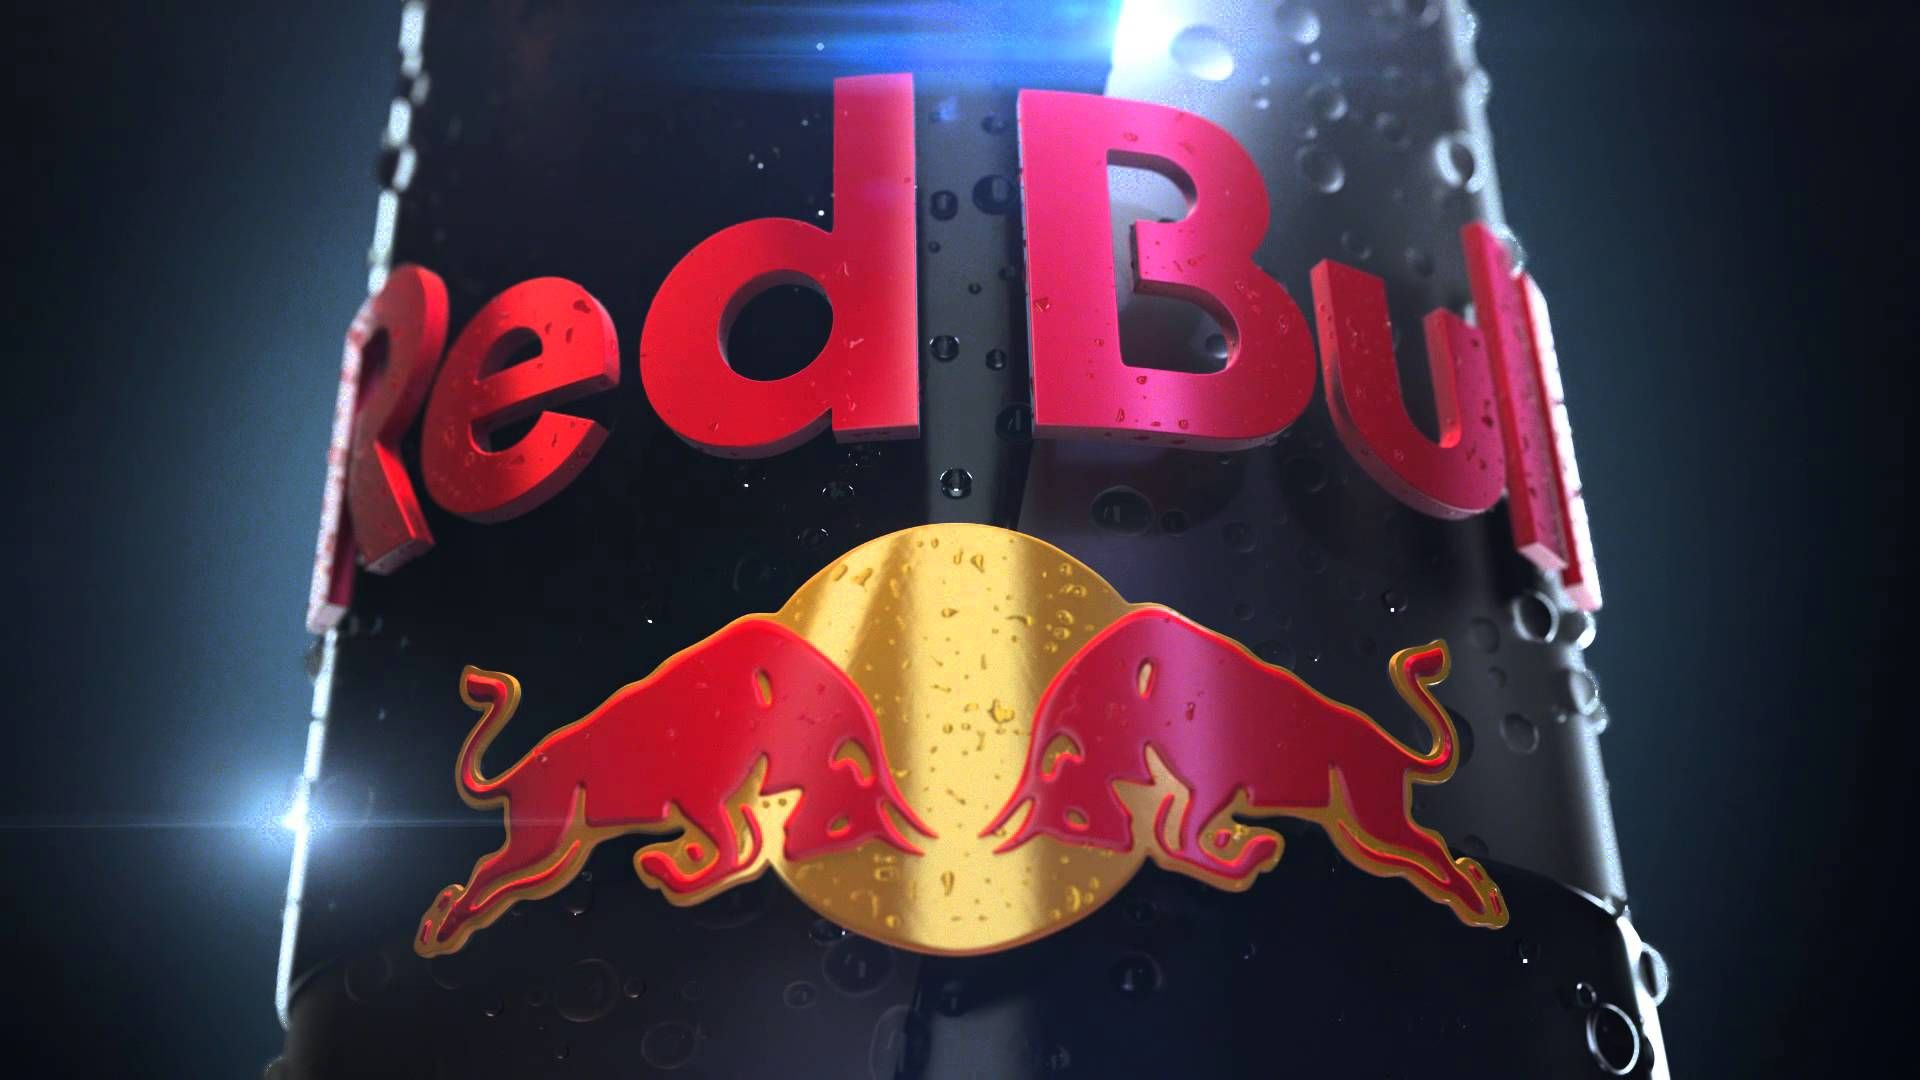 1920x1080 Red Bull Wallpapers